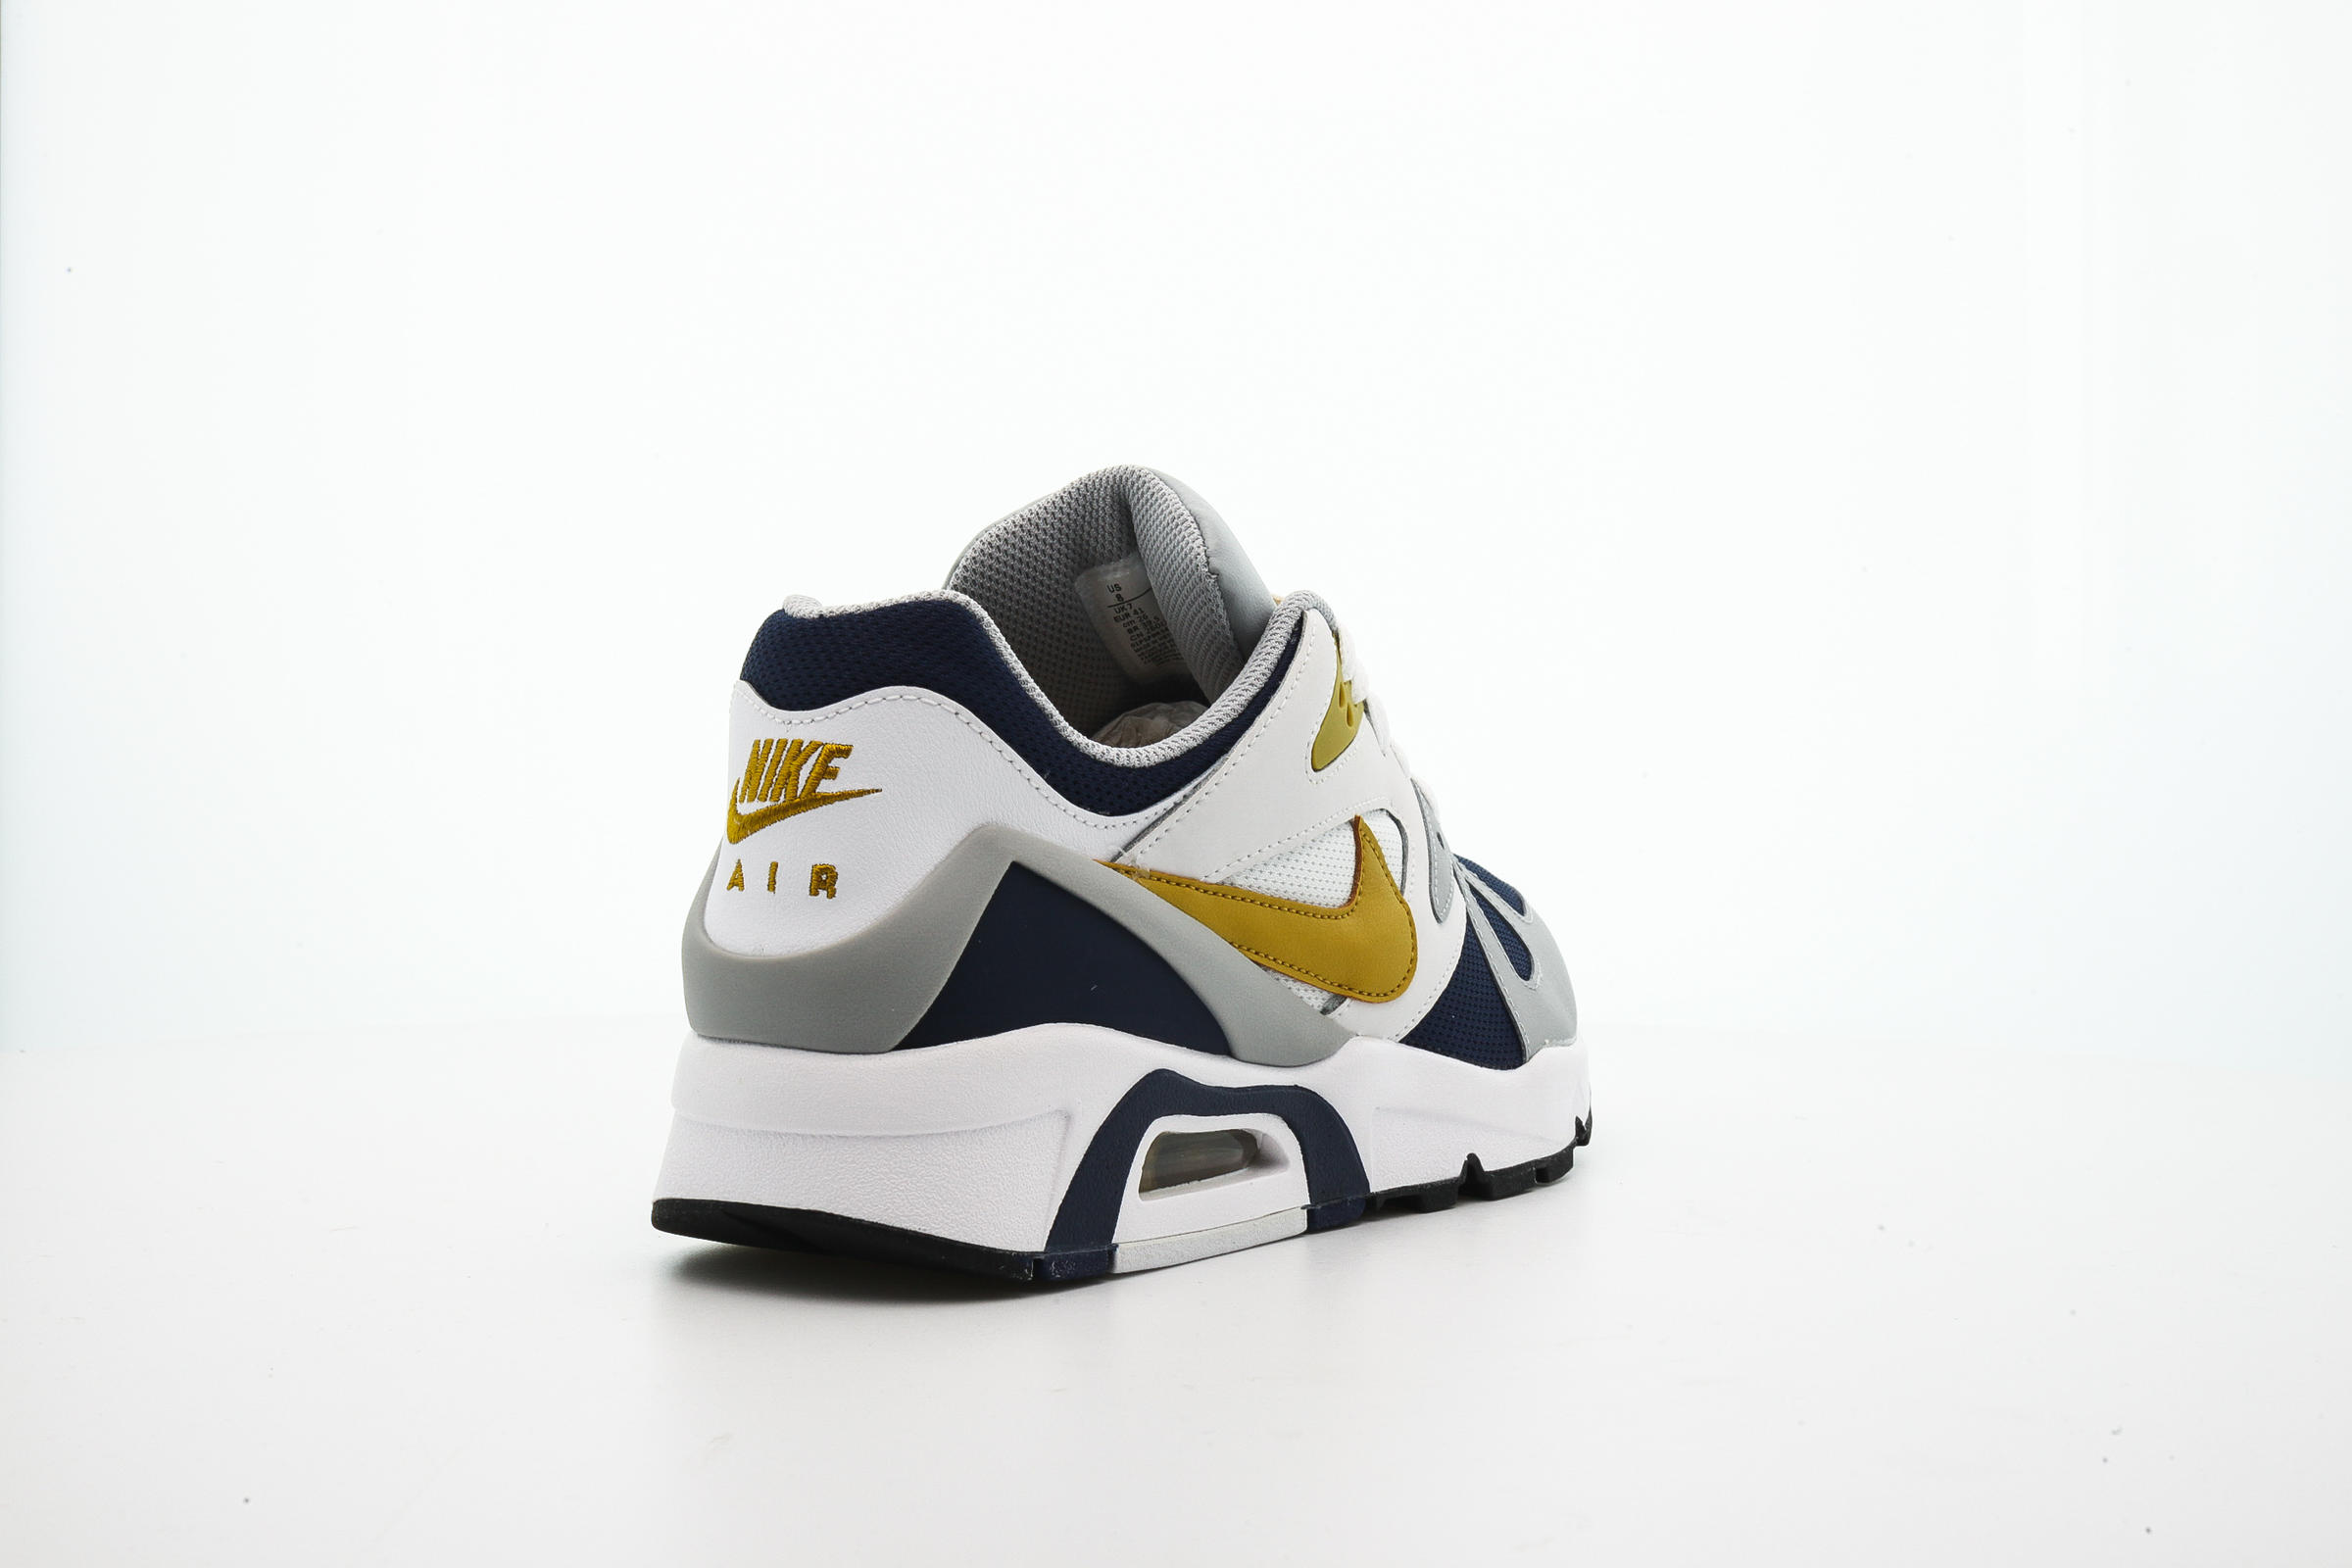 Nike AIR STRUCTURE "MIDNIGHT NAVY"